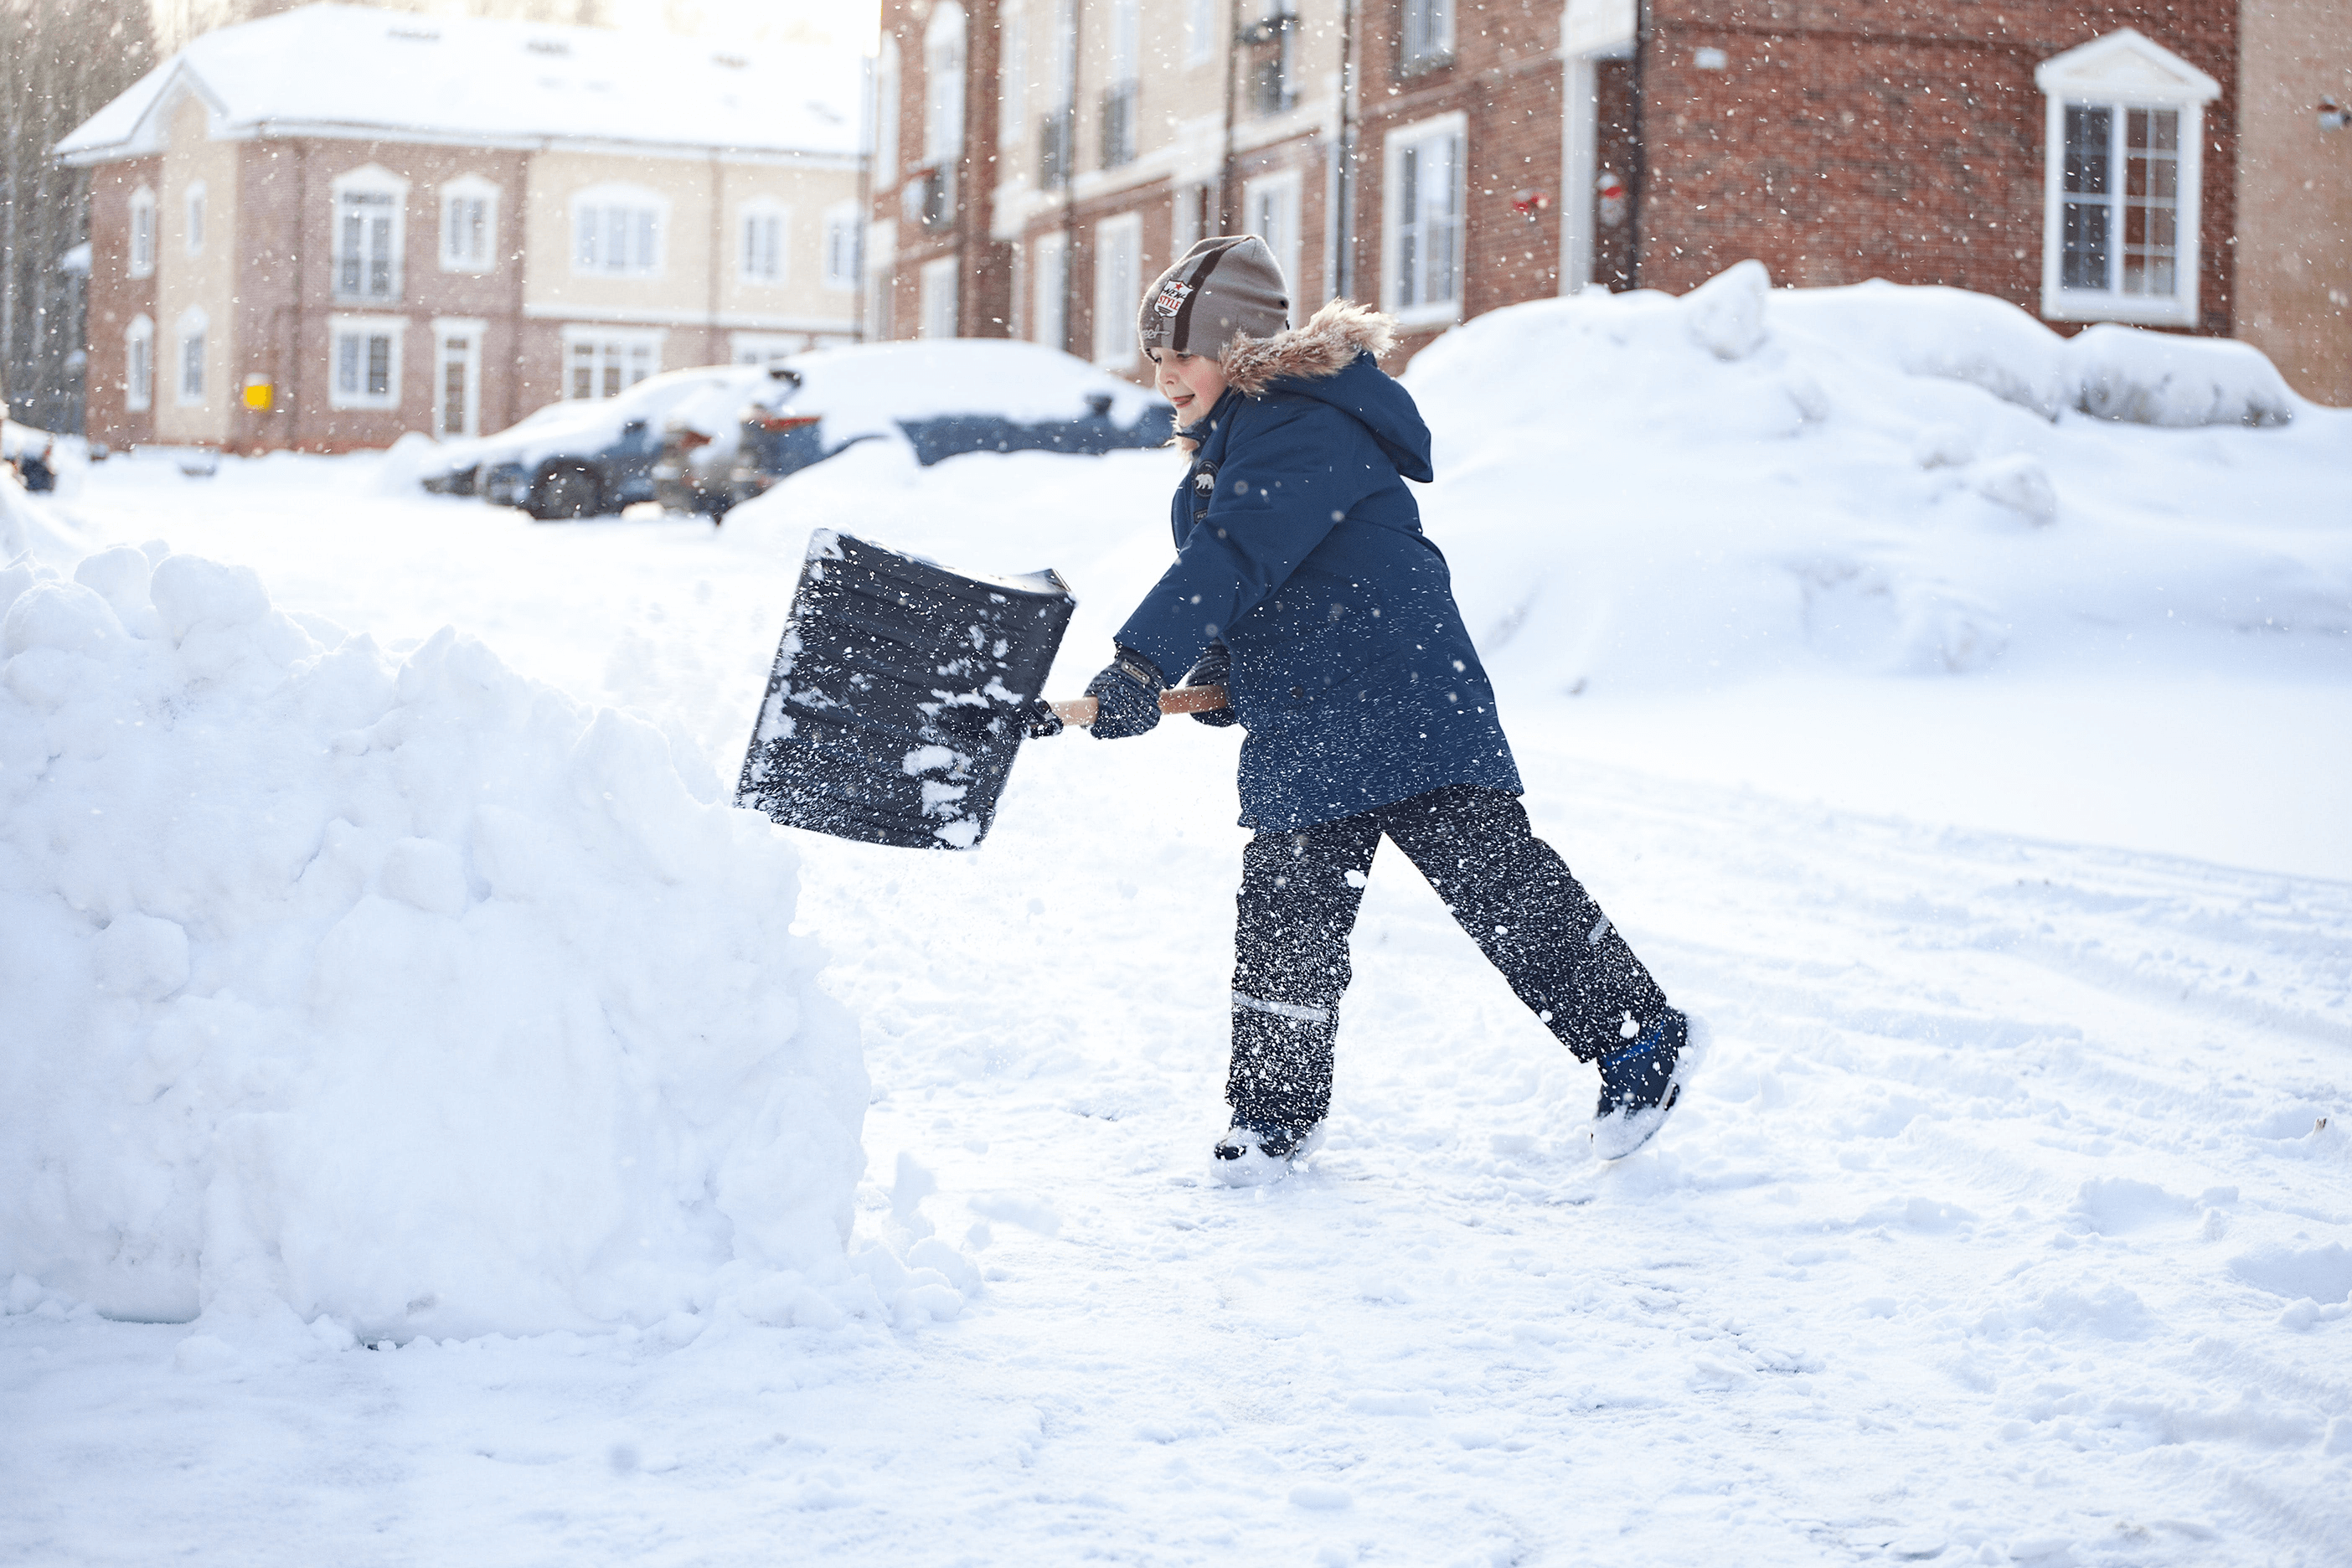 A kid shoveling snow in a neighbor’s driveway to give back during the holiday season.